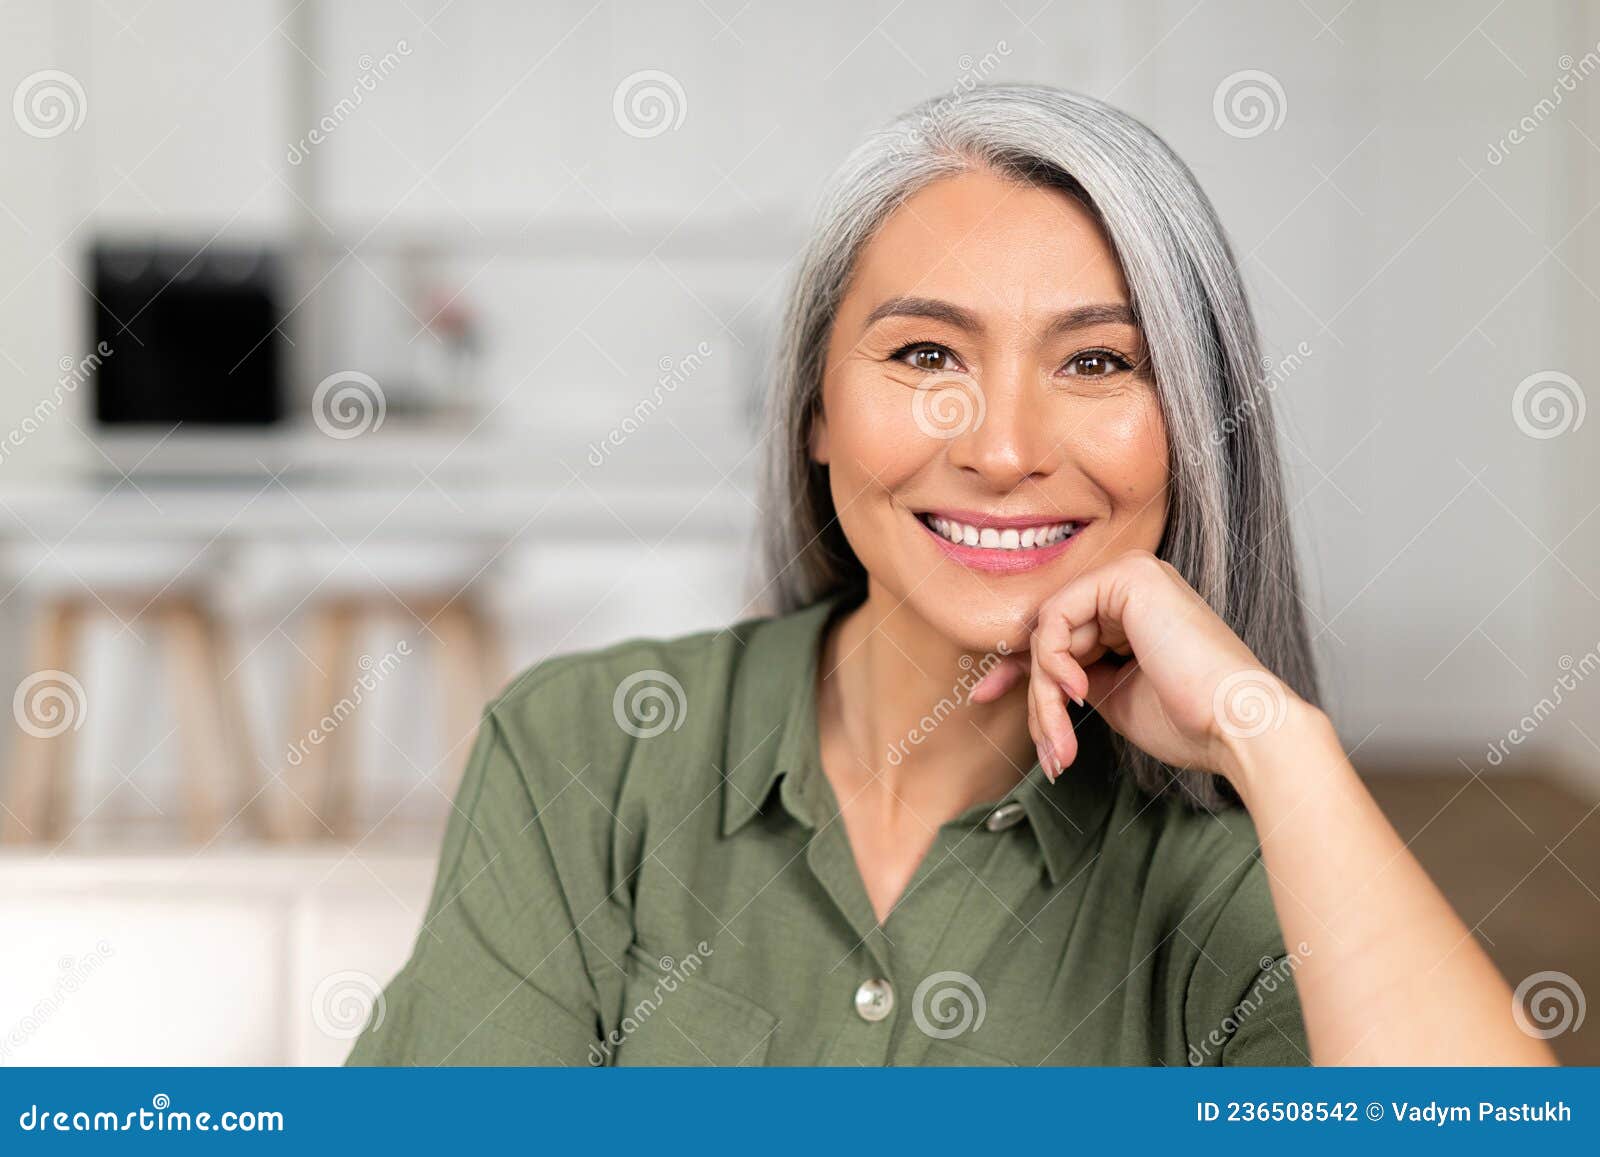 close-up portrait on senior gray-haired woman in home interior